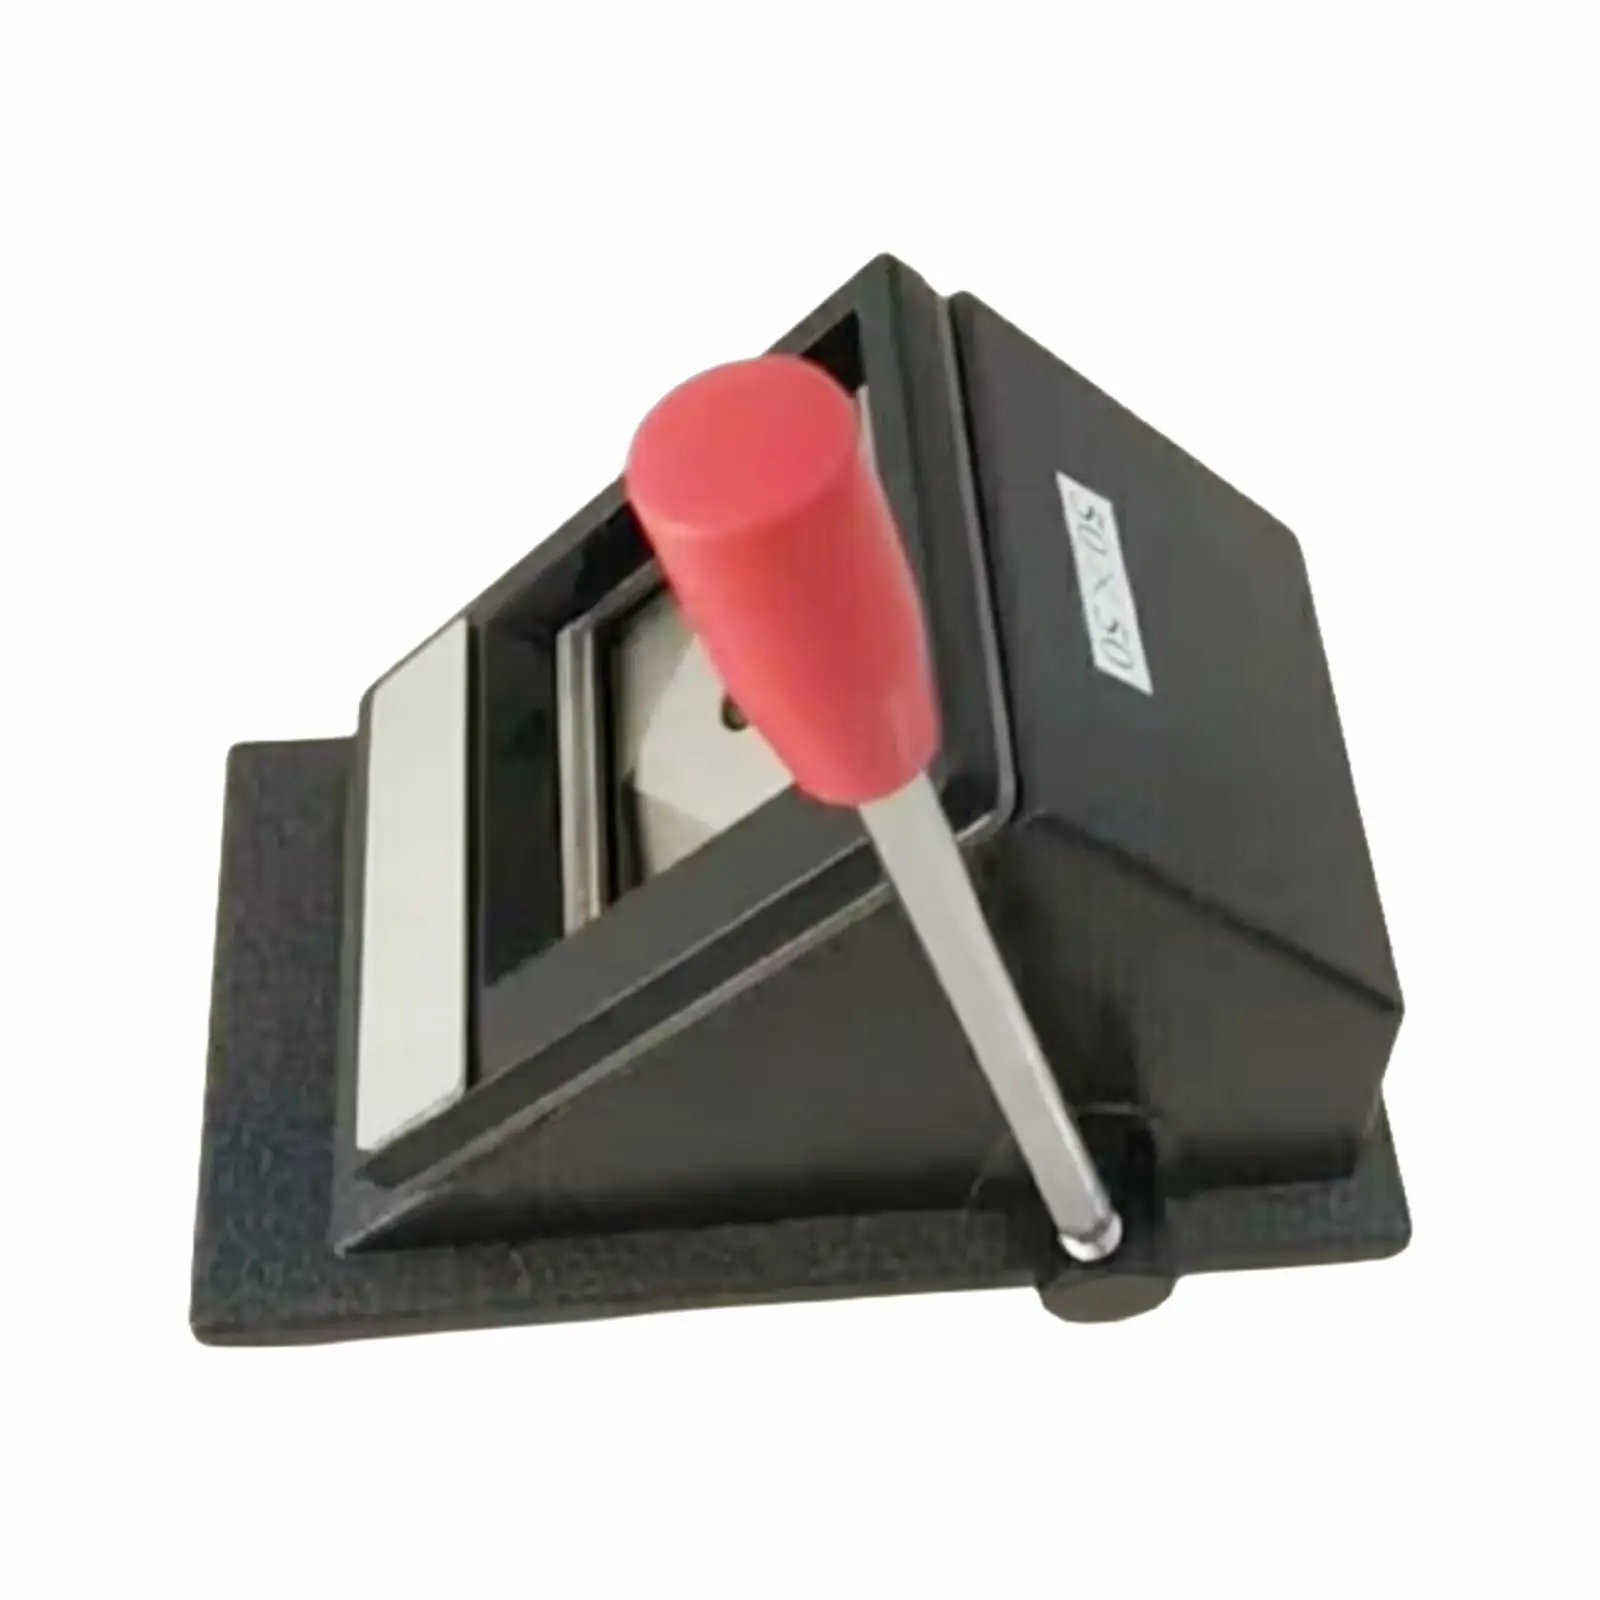 Passport ID Photo Cutter 50x50mm Right Angle Metal Photo Cutting Machine for Card Making Badge Scrapbooking ID Card Credit Card